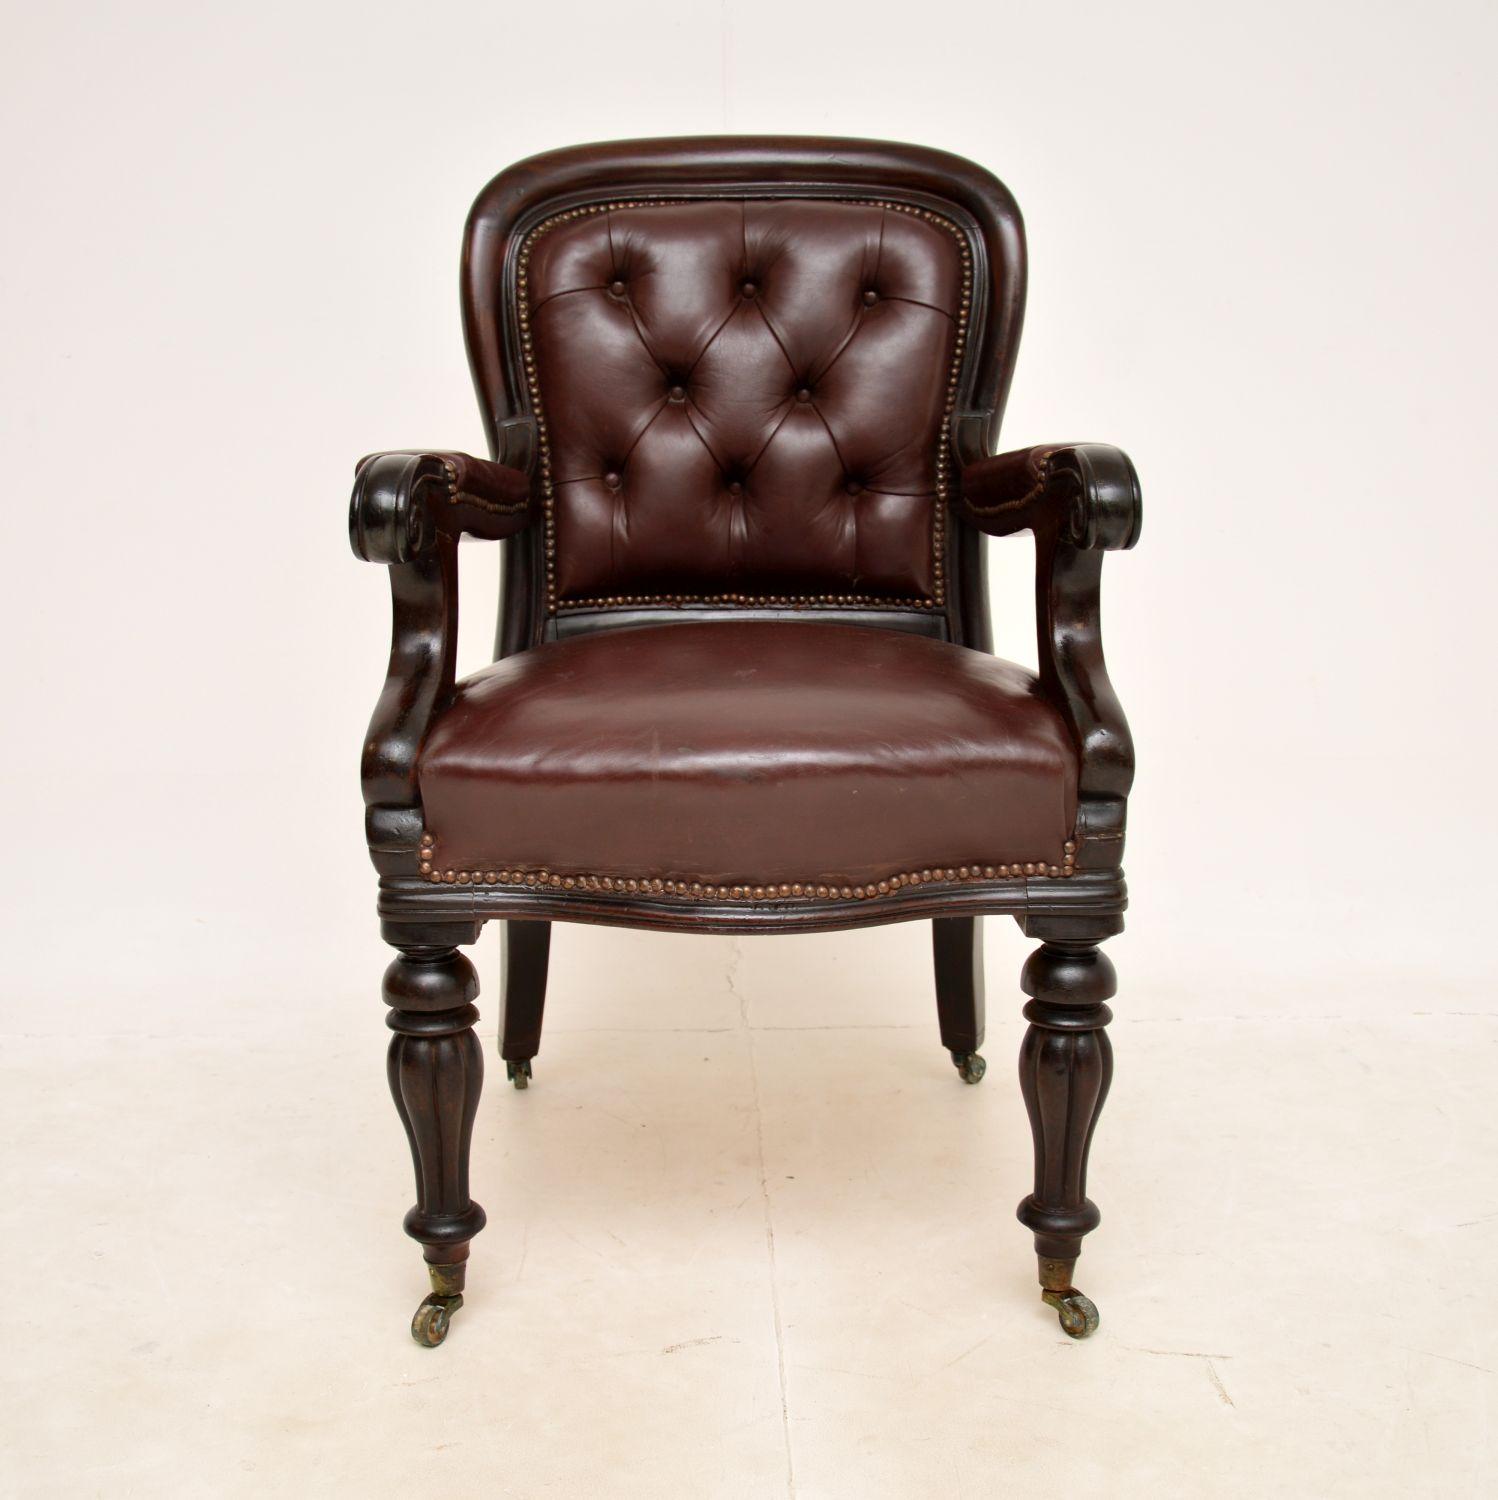 A superb antique William IV period armchair. This was made in England, it dates from around the 1830-40 period.

It is of superb quality, with a very sturdy and bold design. The fluted baluster legs are beautifully turned, this has a deep buttoned